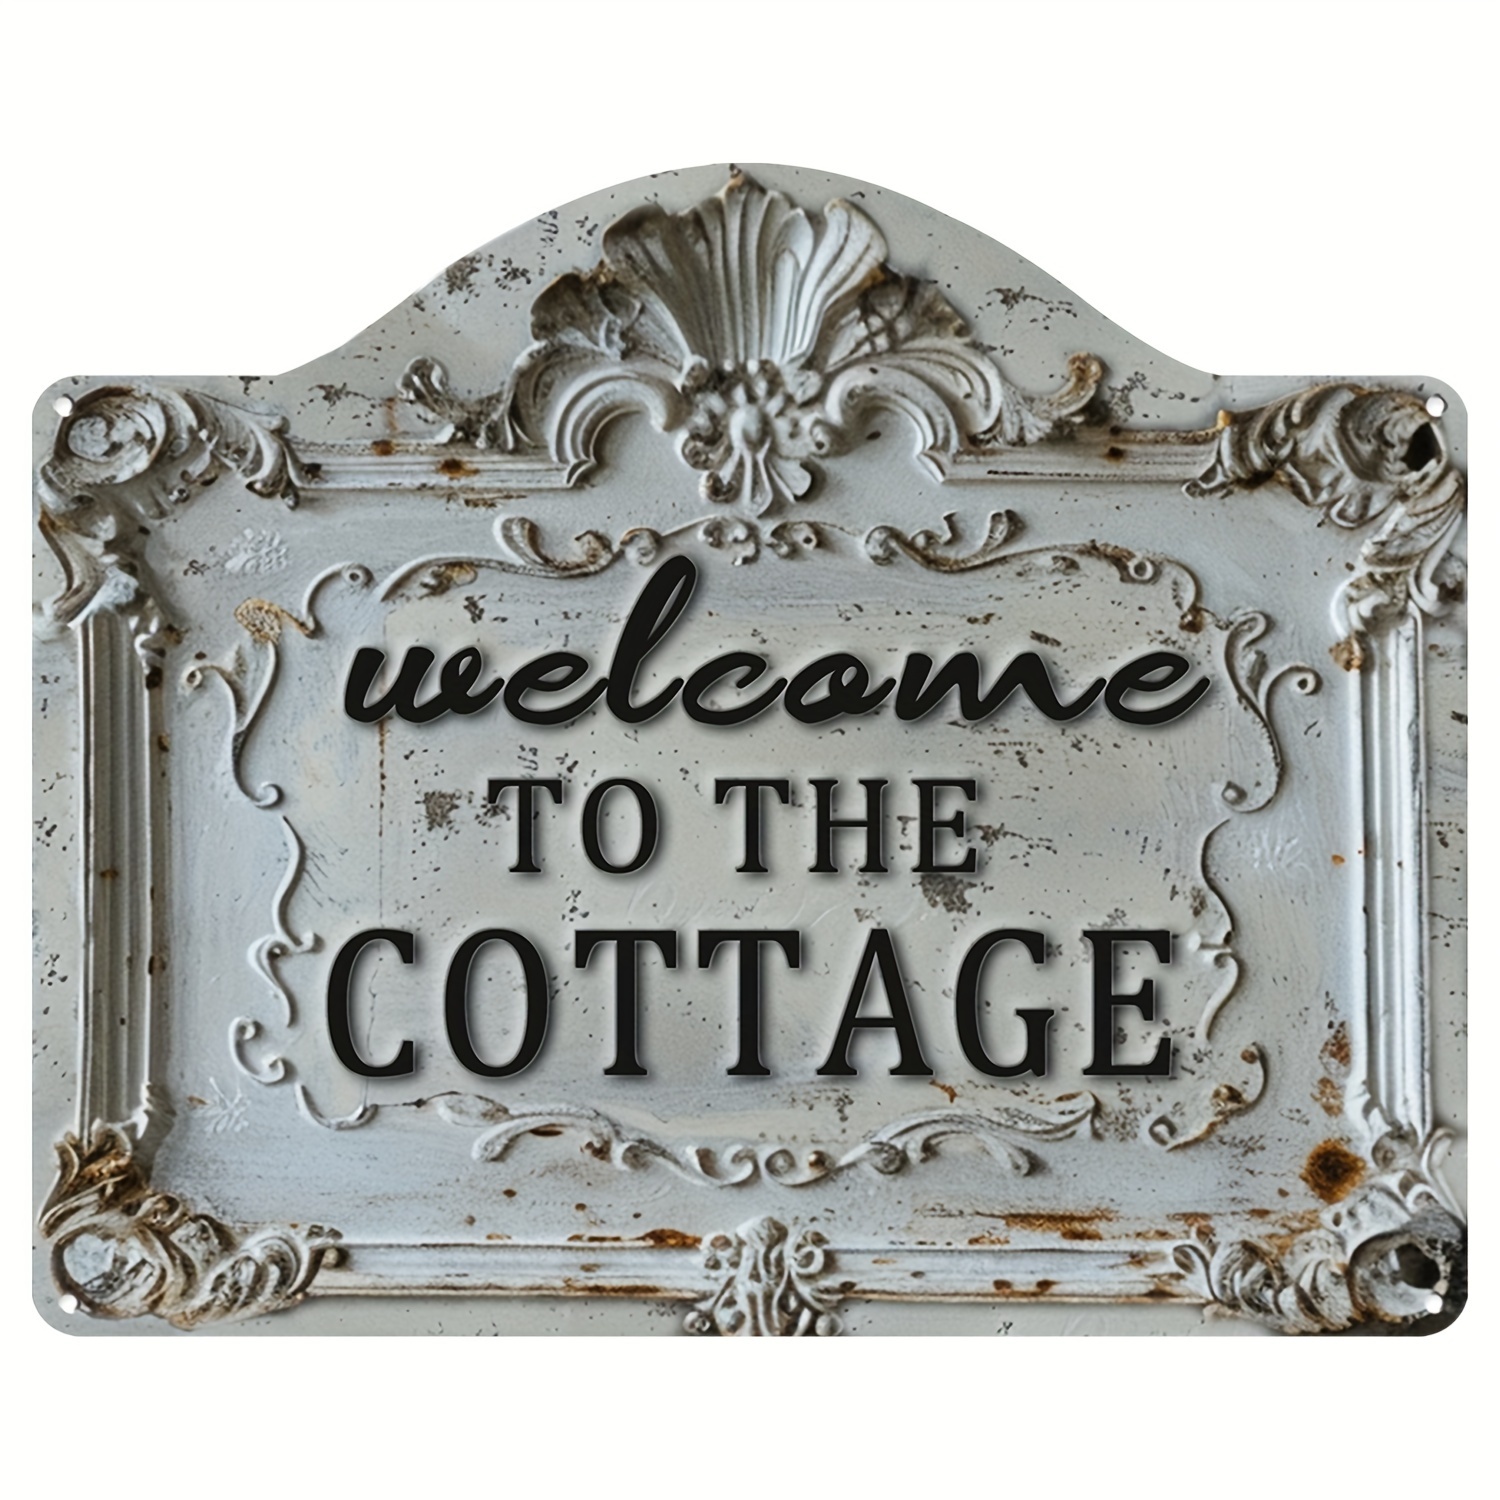 

Charming Vintage Welcome Sign - Aluminum Wall Art For Home, Office, Farmhouse & Garden Decor | Perfect Surprise Gift For Someone Special | 11.8"x9.8